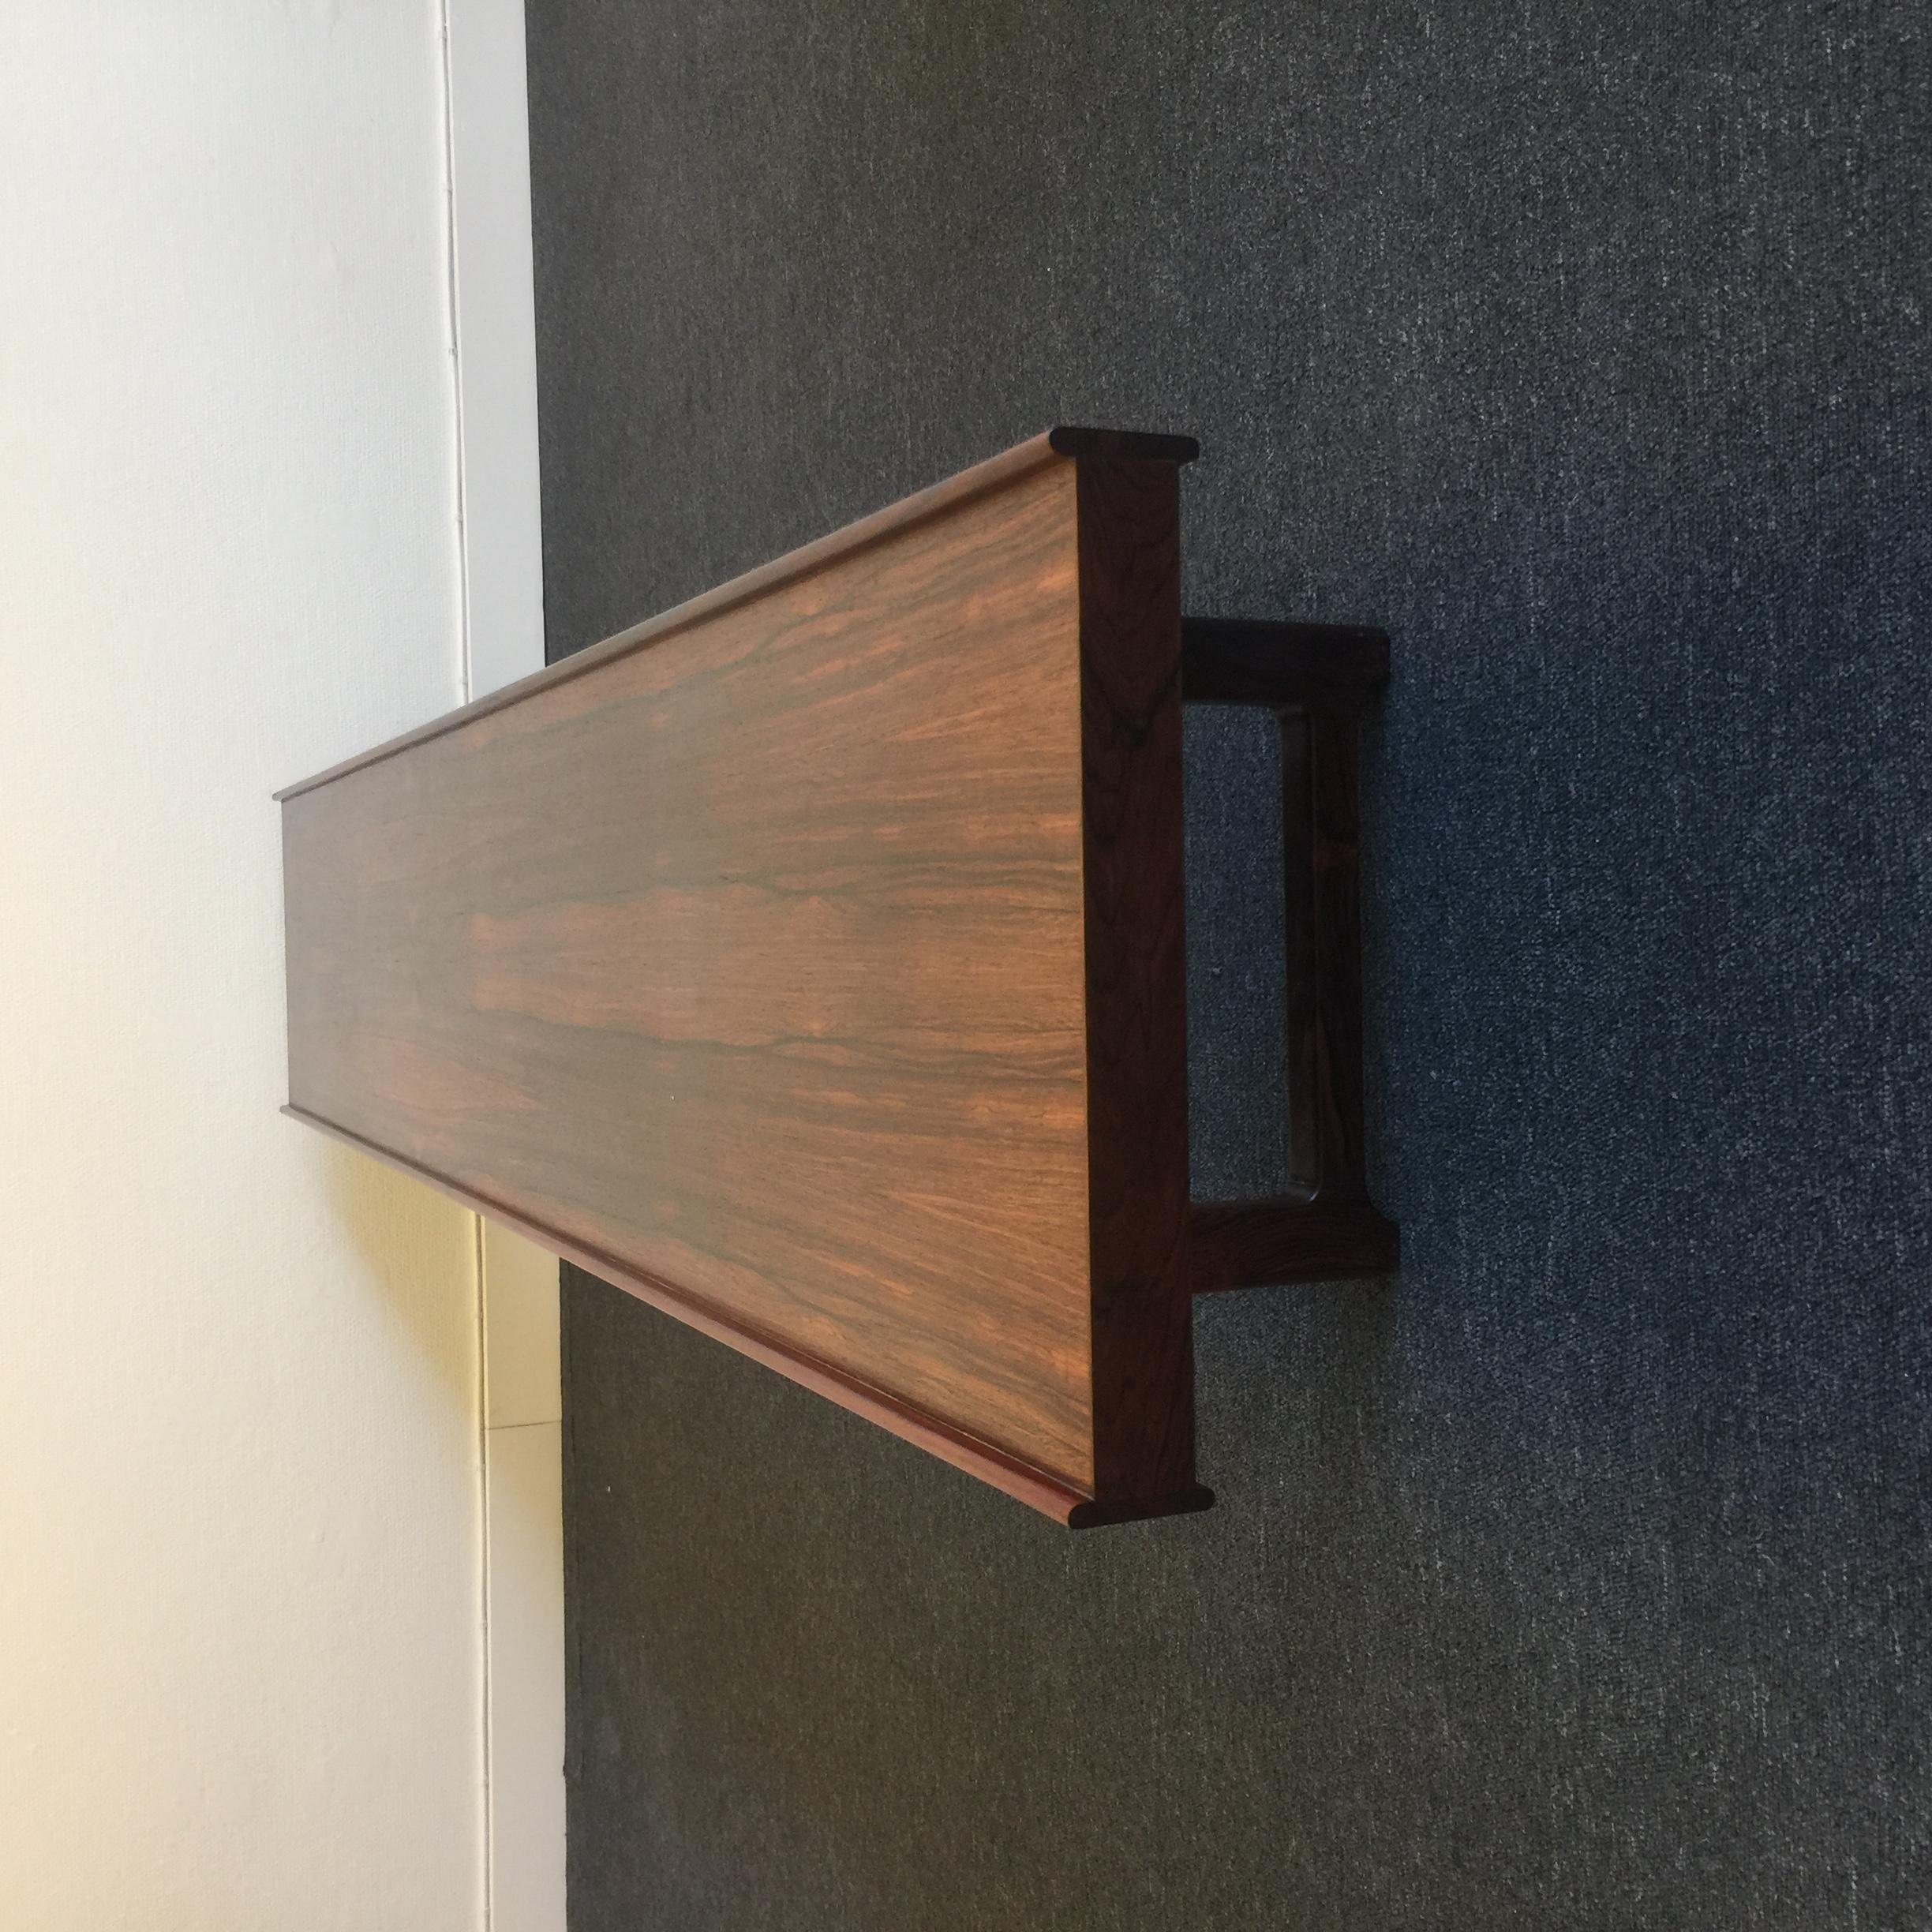 This bench or room divider was designed by Torbjörn Afdal (1917-1999), Norway in 1960. It was manufactured by Mellemstrands trävarefabrik in Krobo. It is made of rosewood. Comes with Cites certificate. Great vintage condition with only minor signs